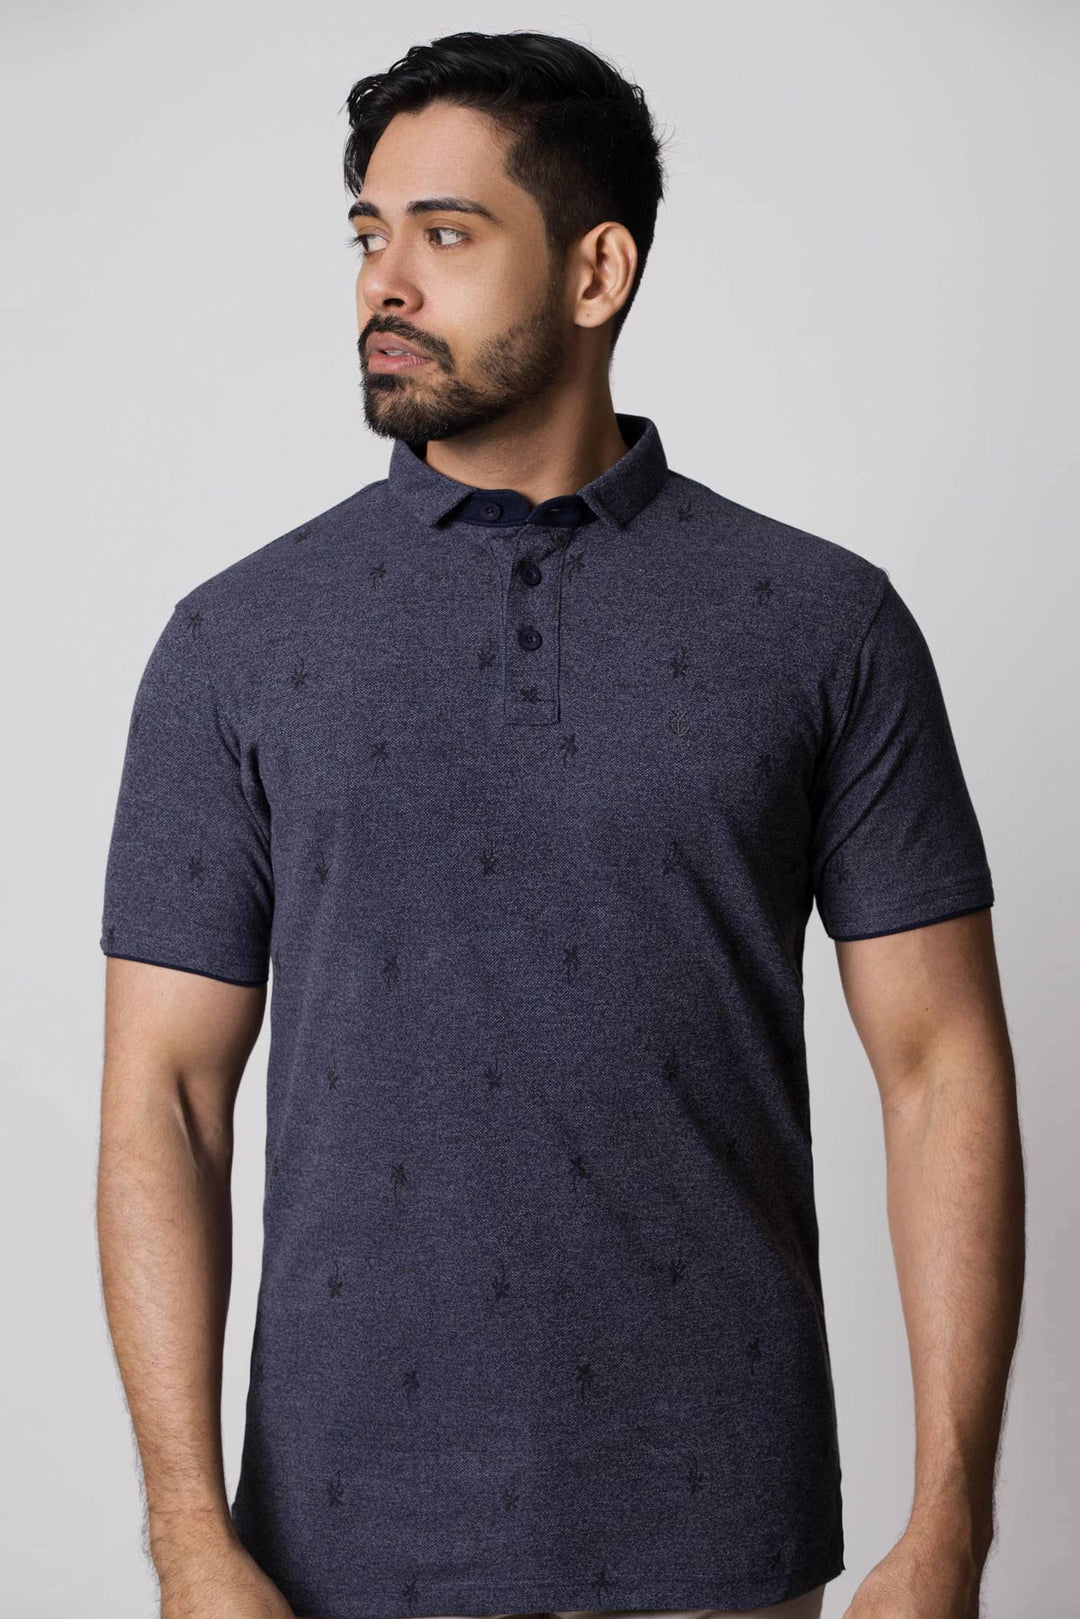 LCY | Art of Summer Premium AOP Polo LCY